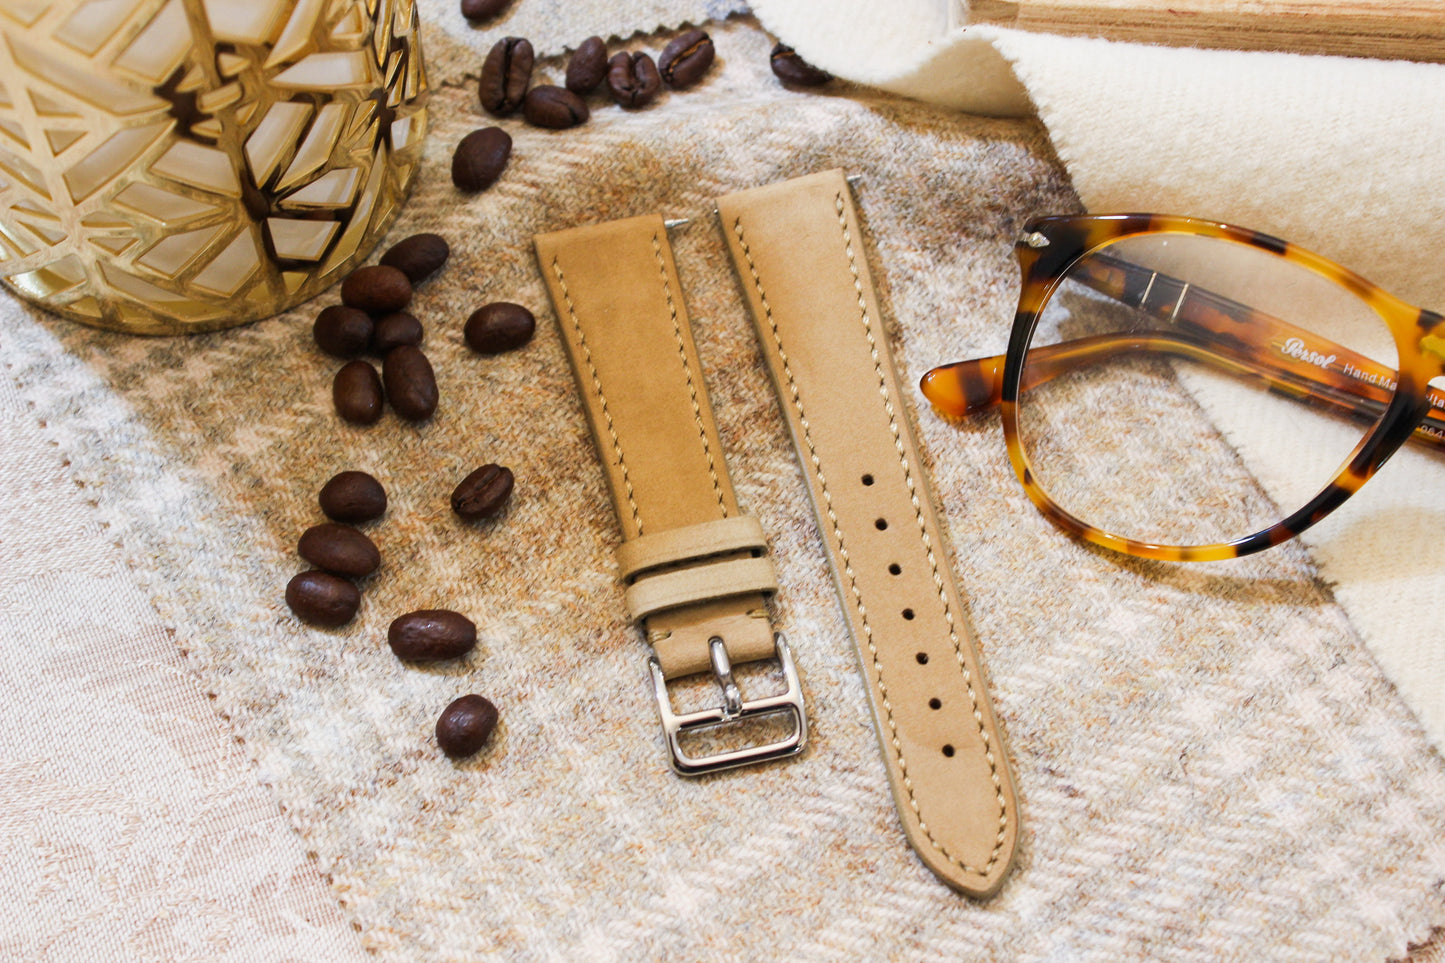 The Tod's Point Watch Strap in Sand